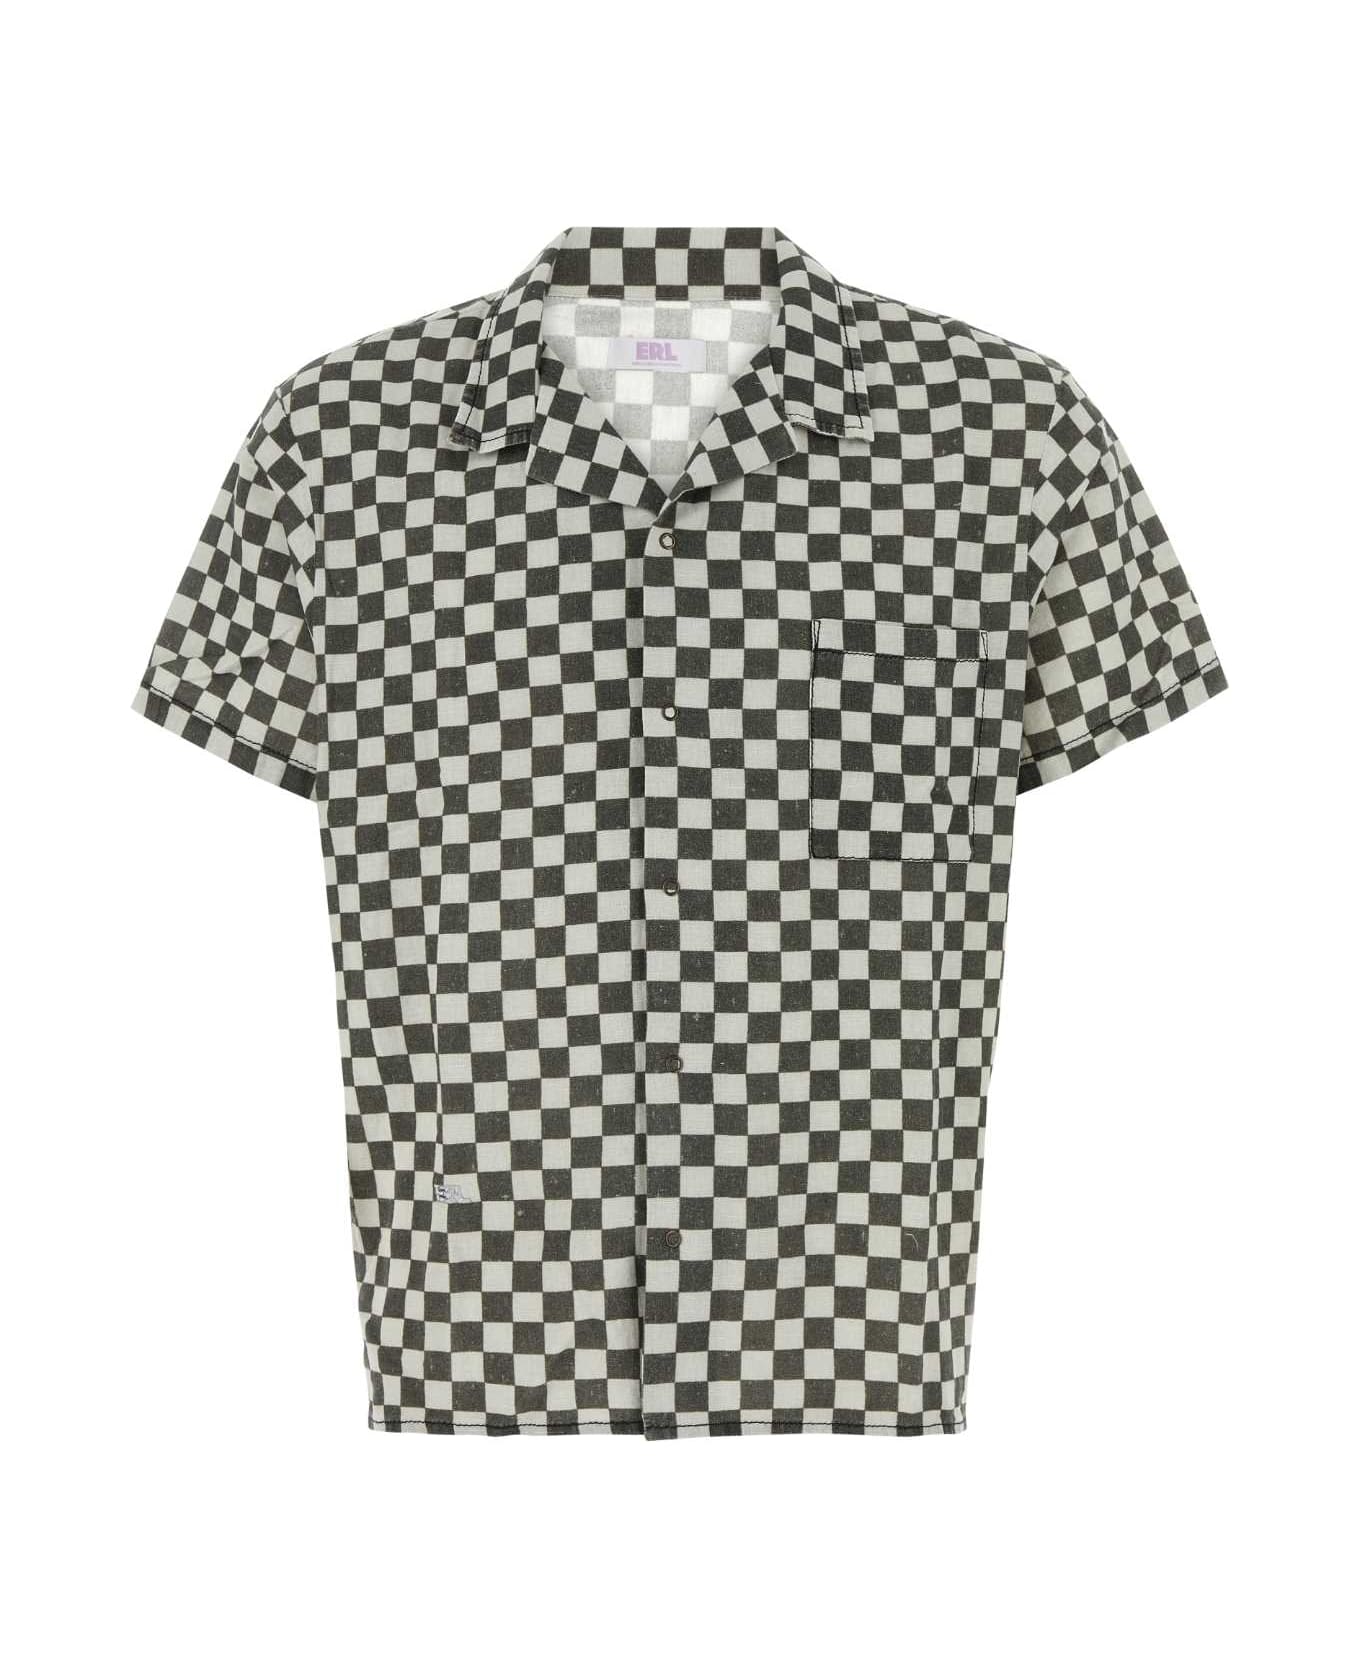 ERL Printed Cotton And Linen Shirt - CHECKER